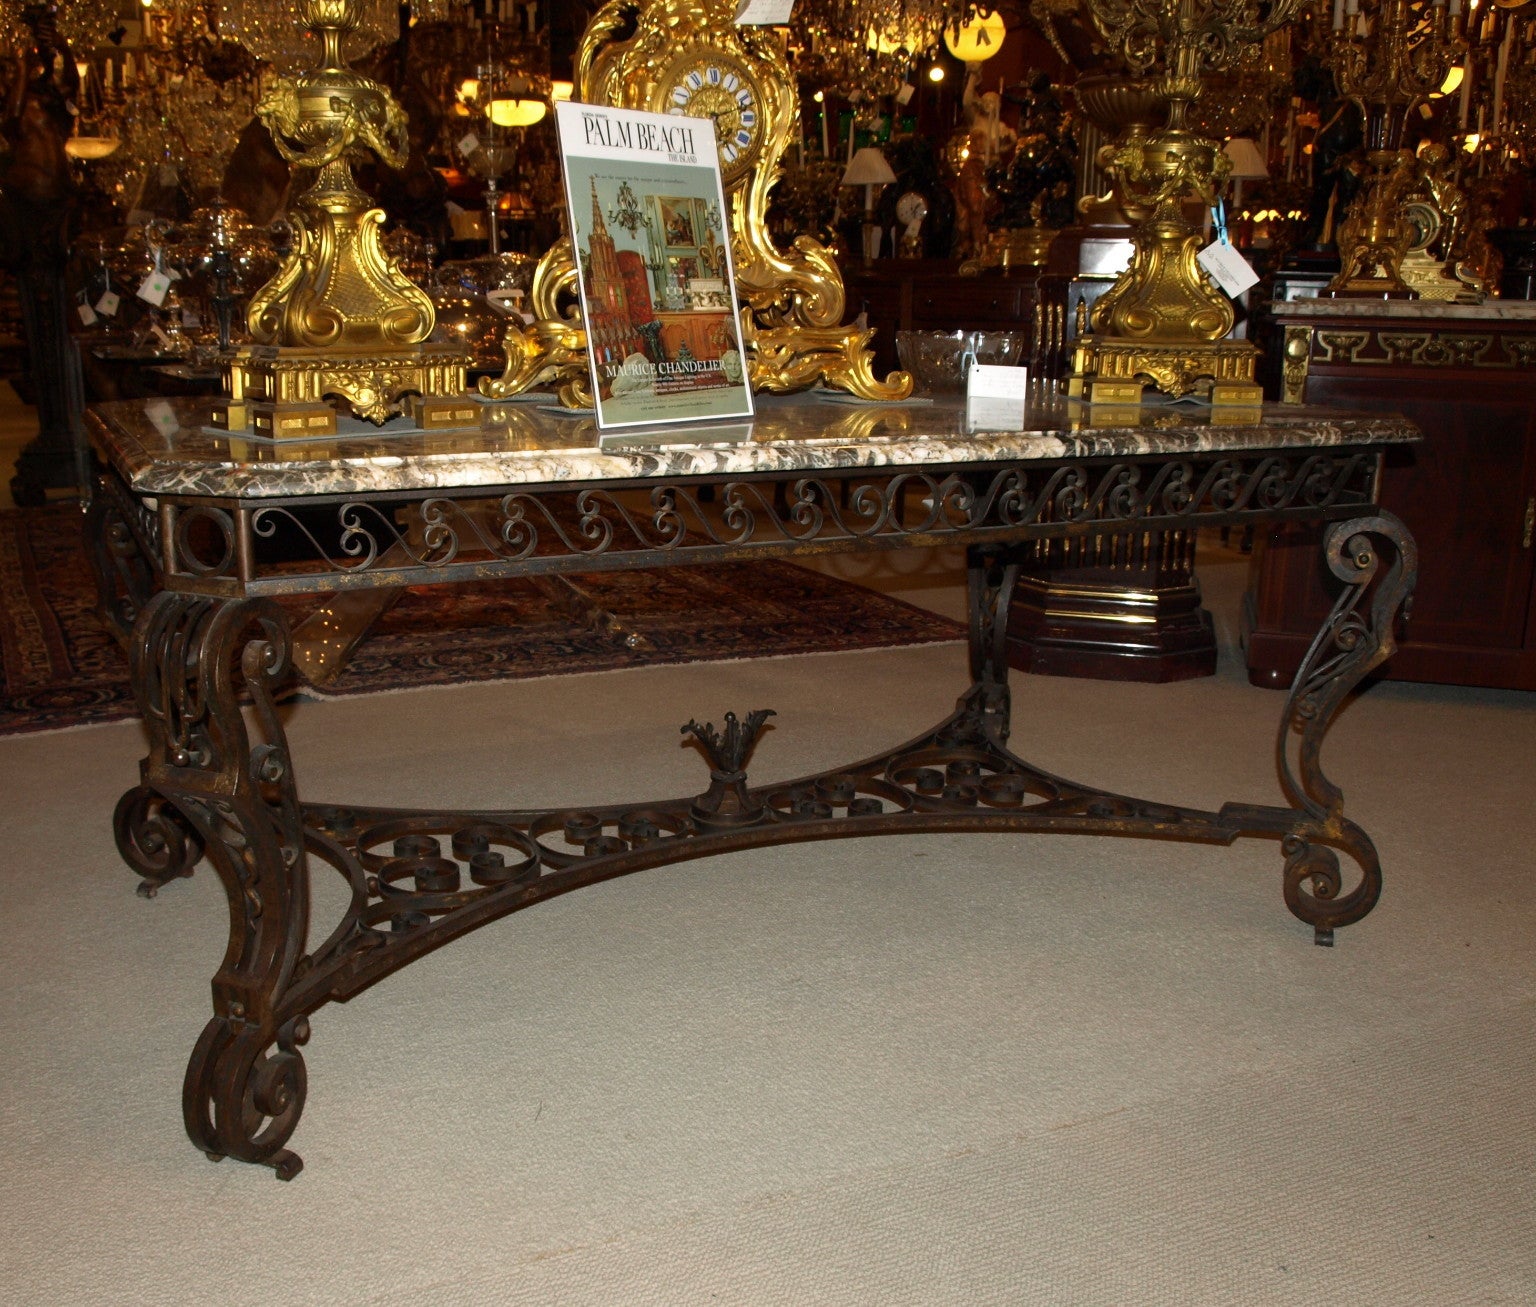 Unusual and beautiful iron table with a beveled marble top and amazing stretcher, could be used as a center table or library table.